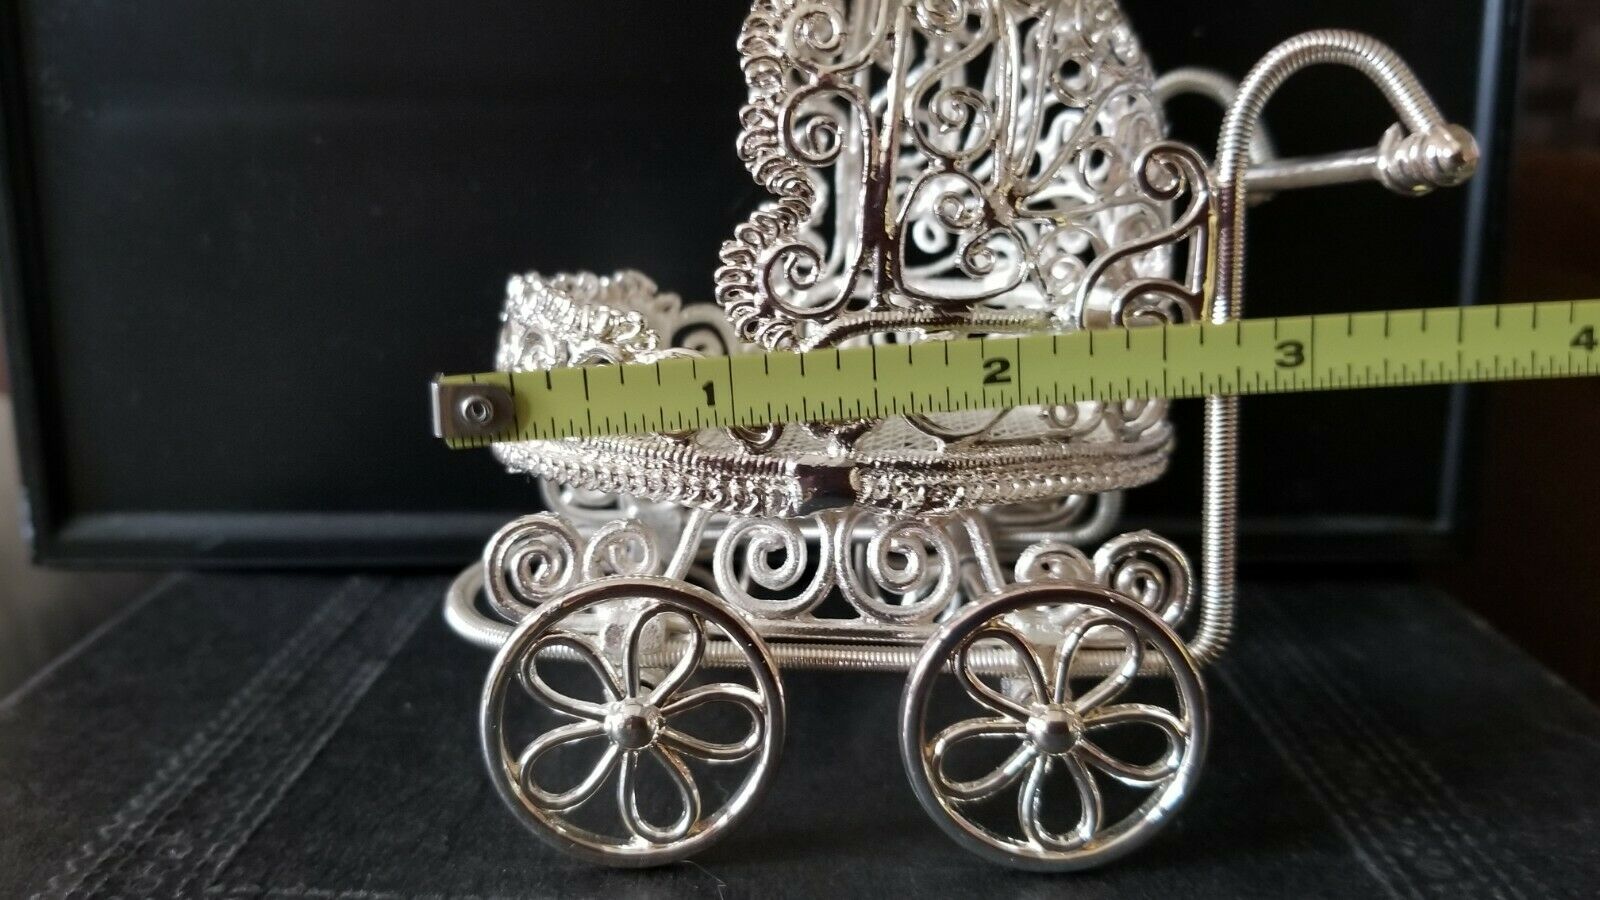 Miniature Silver Baby Pram - Solid Metal - Great Baby Shower Gift